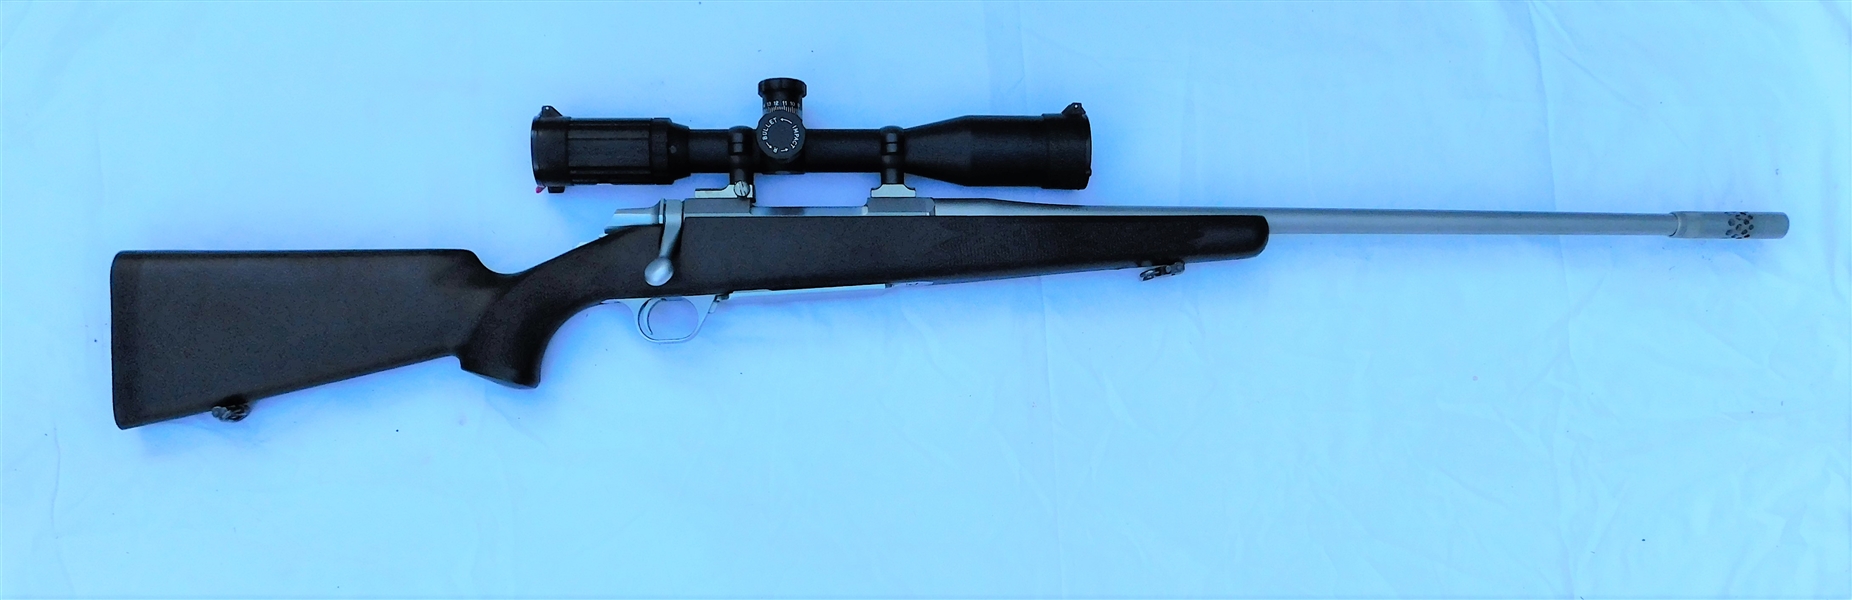 Browning 7mm Magnum Bolt Action Rifle - Stainless Steel - Factory Boss on End of Barrel - Made in Japan- Approximately 7 Rounds Fired - Butler Creek Scope -With Nitrogen Gas Port